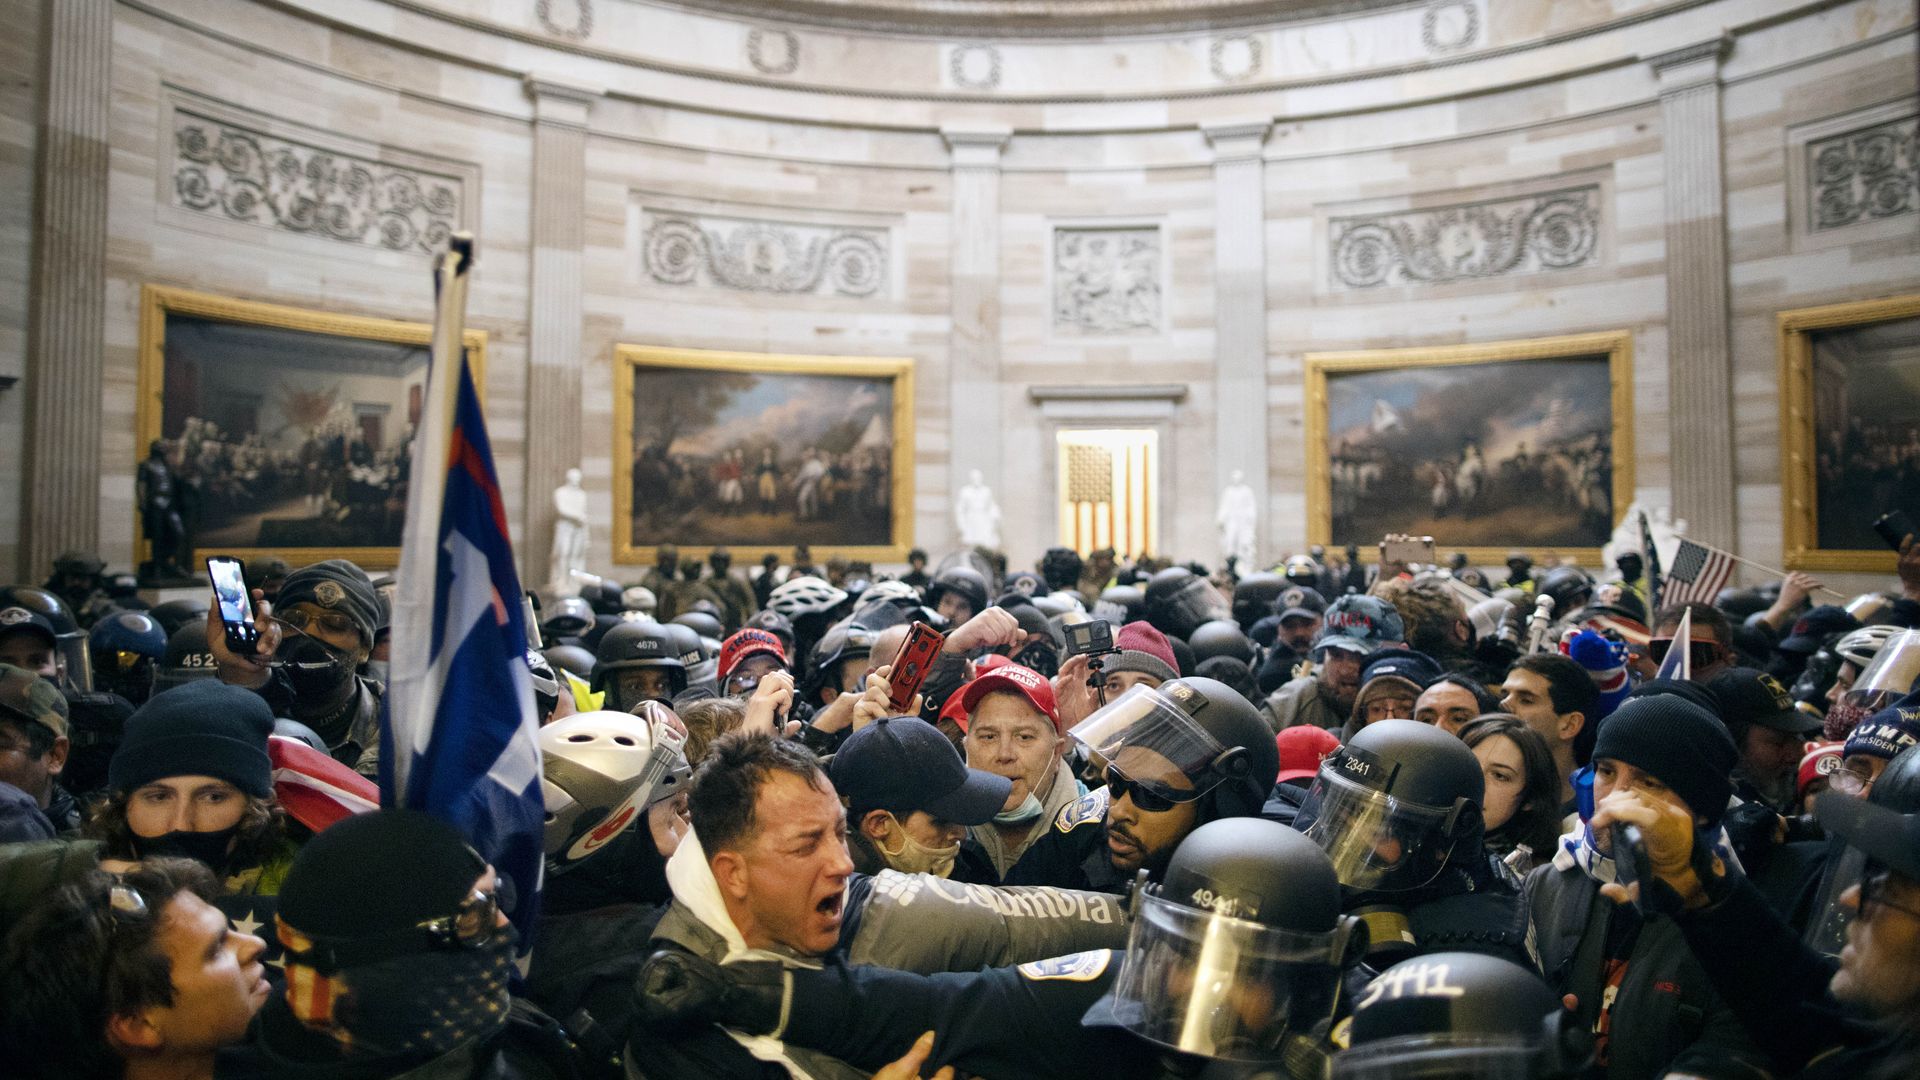 Protesters clash with police inside the Capitol rotunda on January 6.